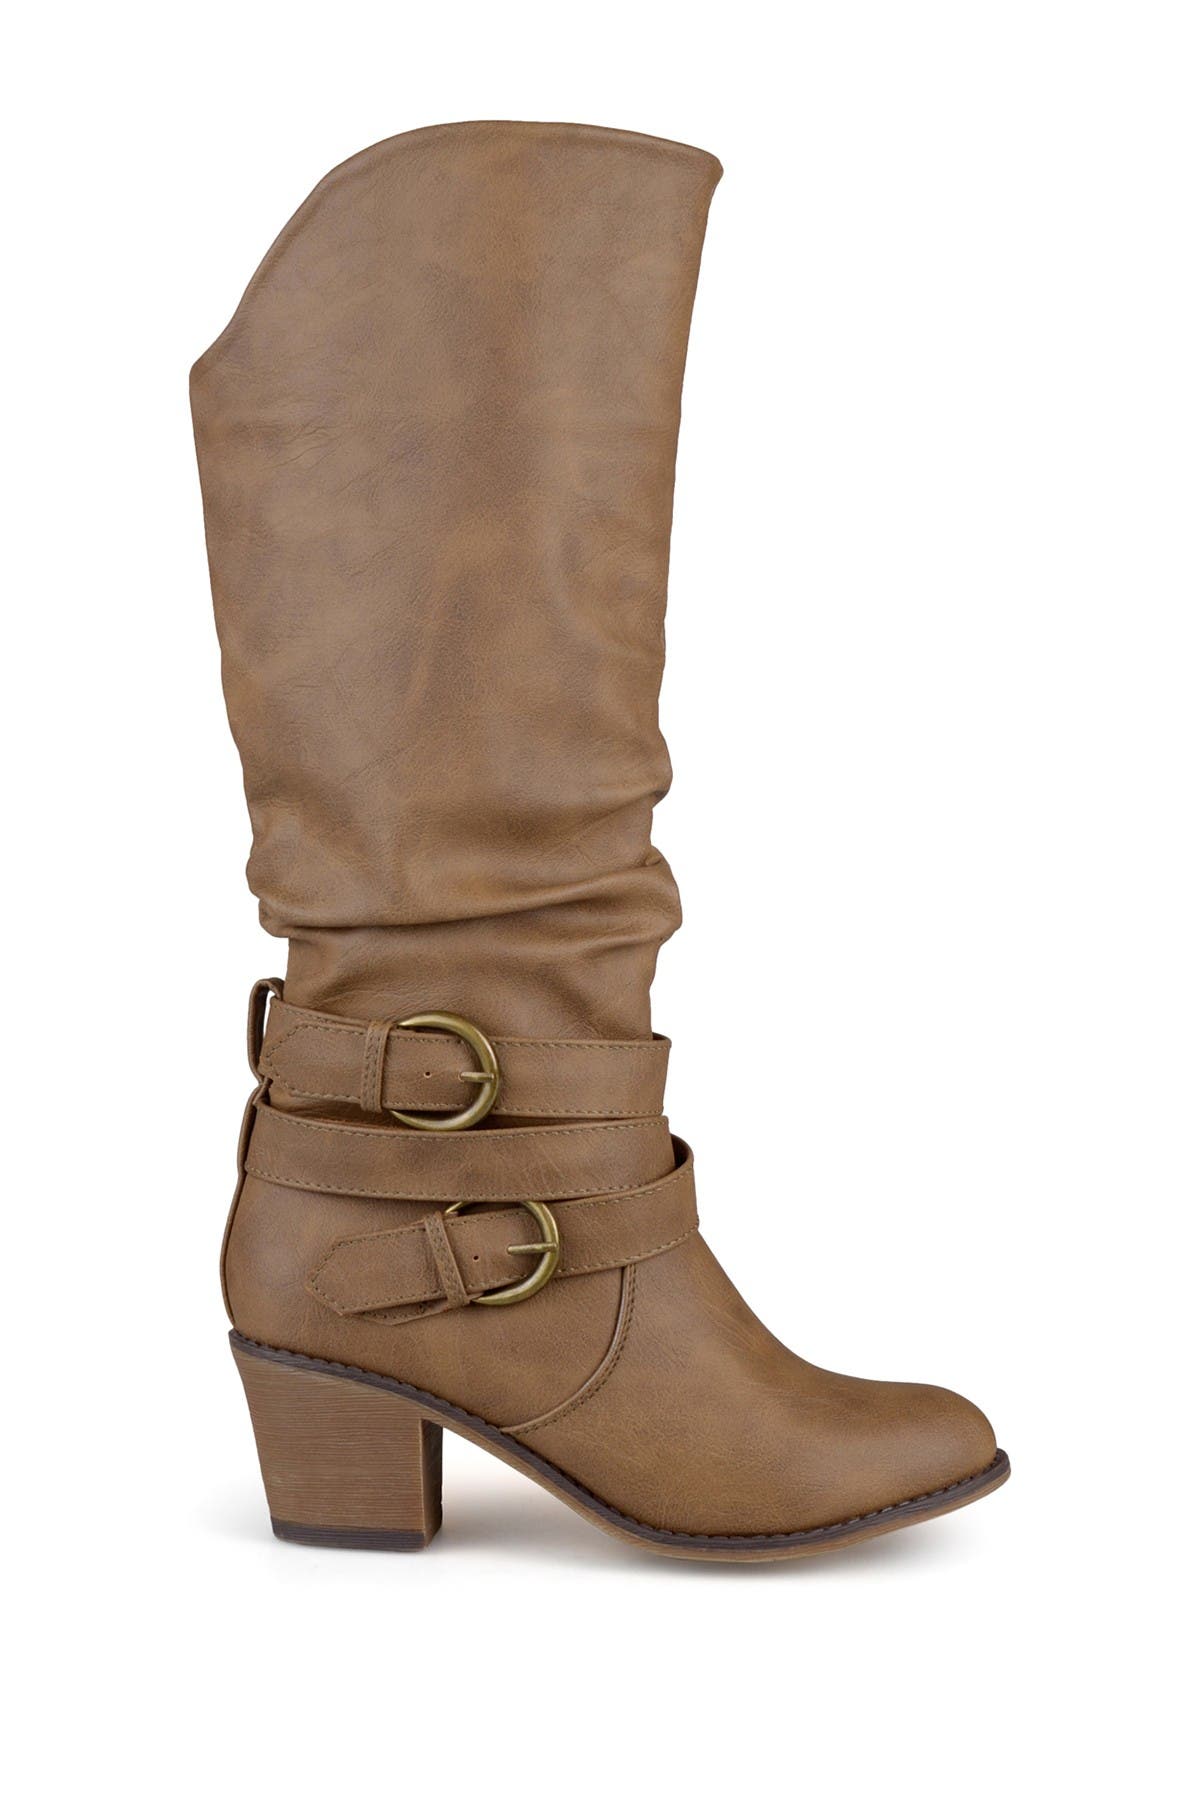 Journee Collection Late Buckle Tall Boot In Medium Beige